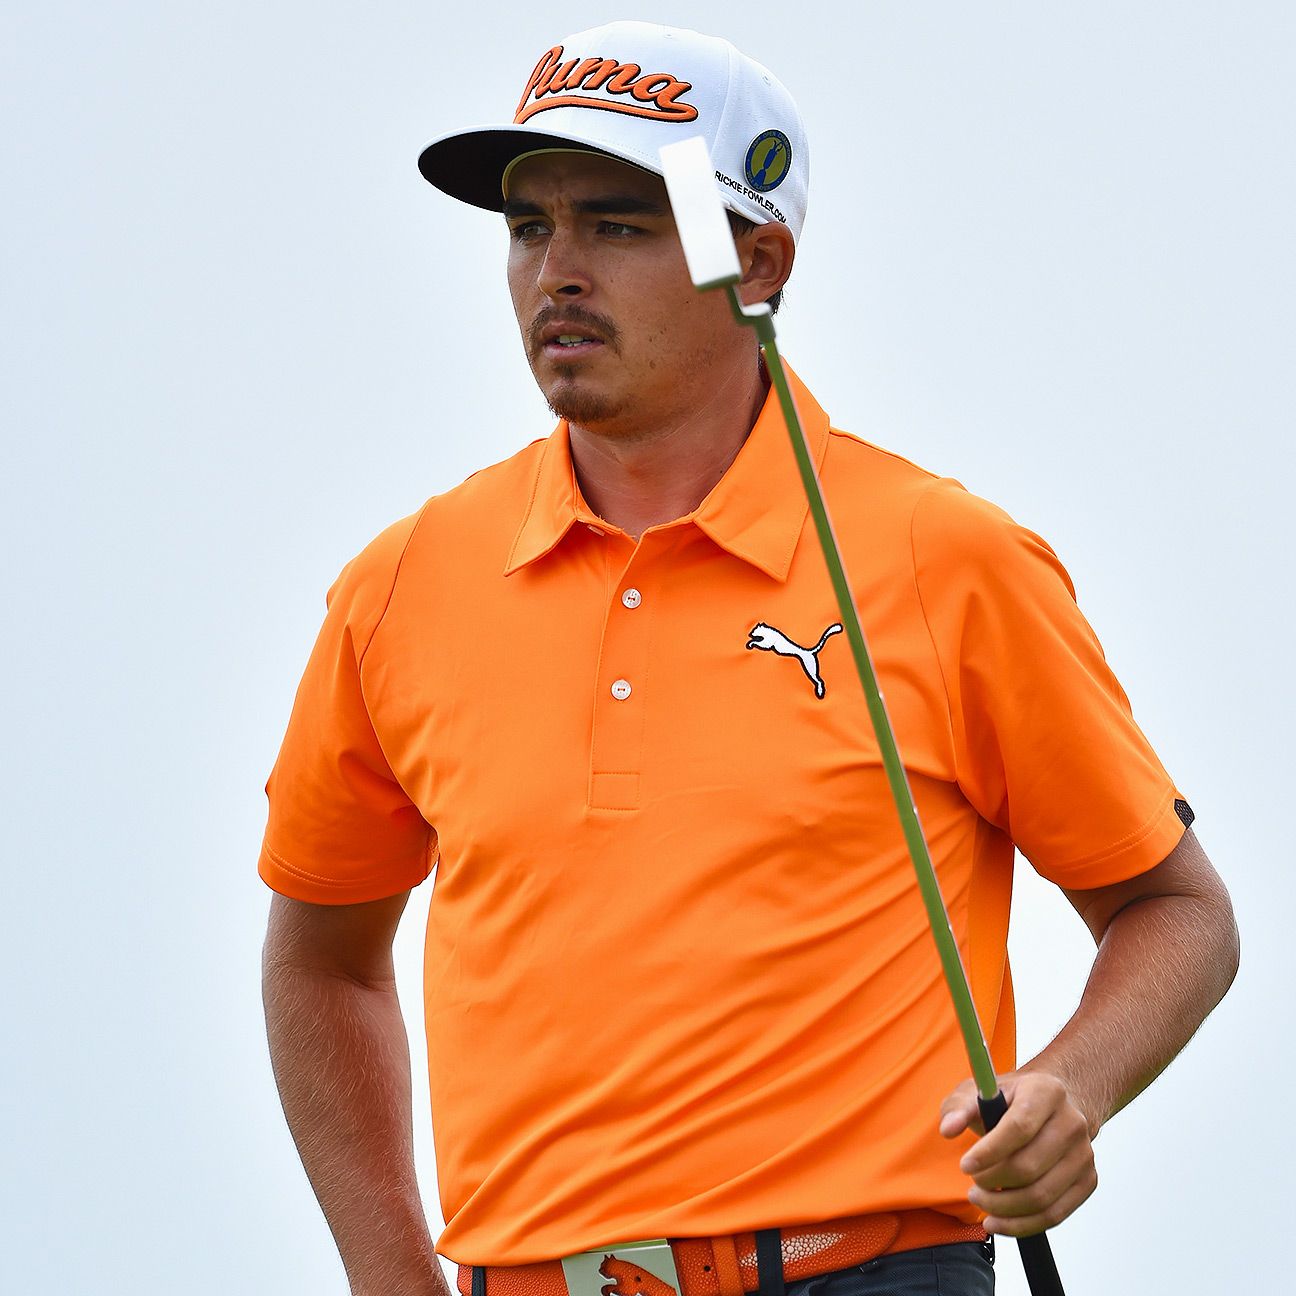 2014 Open Championship Rickie Fowler did everything but win